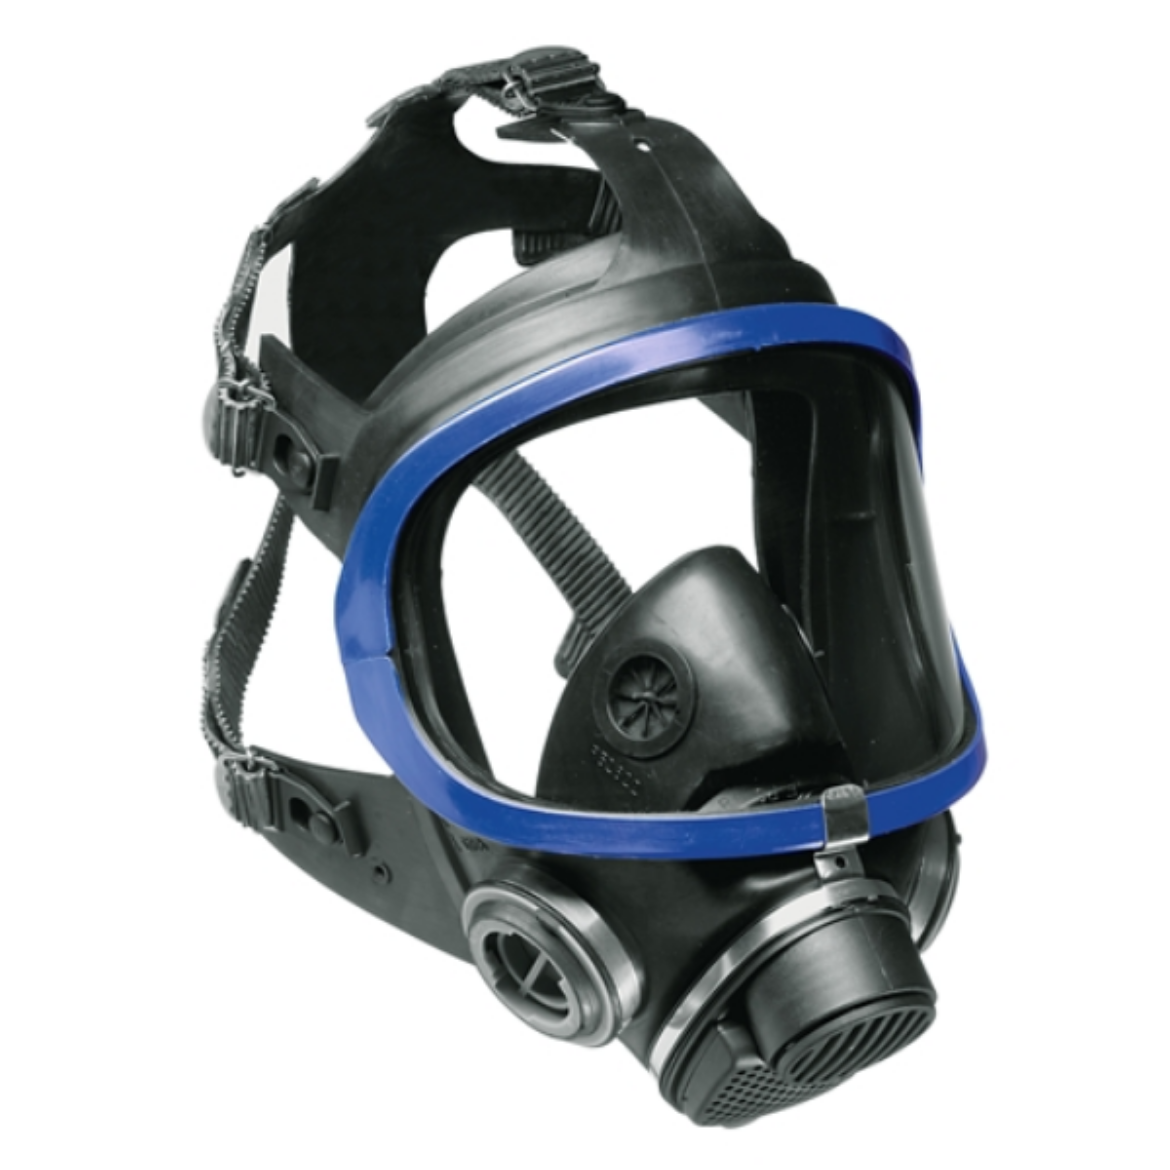 Picture of X-PLORE 5500 POLYCARBONATE VISOR FULL FACE RESPIRATOR CHEMICAL KIT WITH ABEK1Hg P2/P3 FILTERS